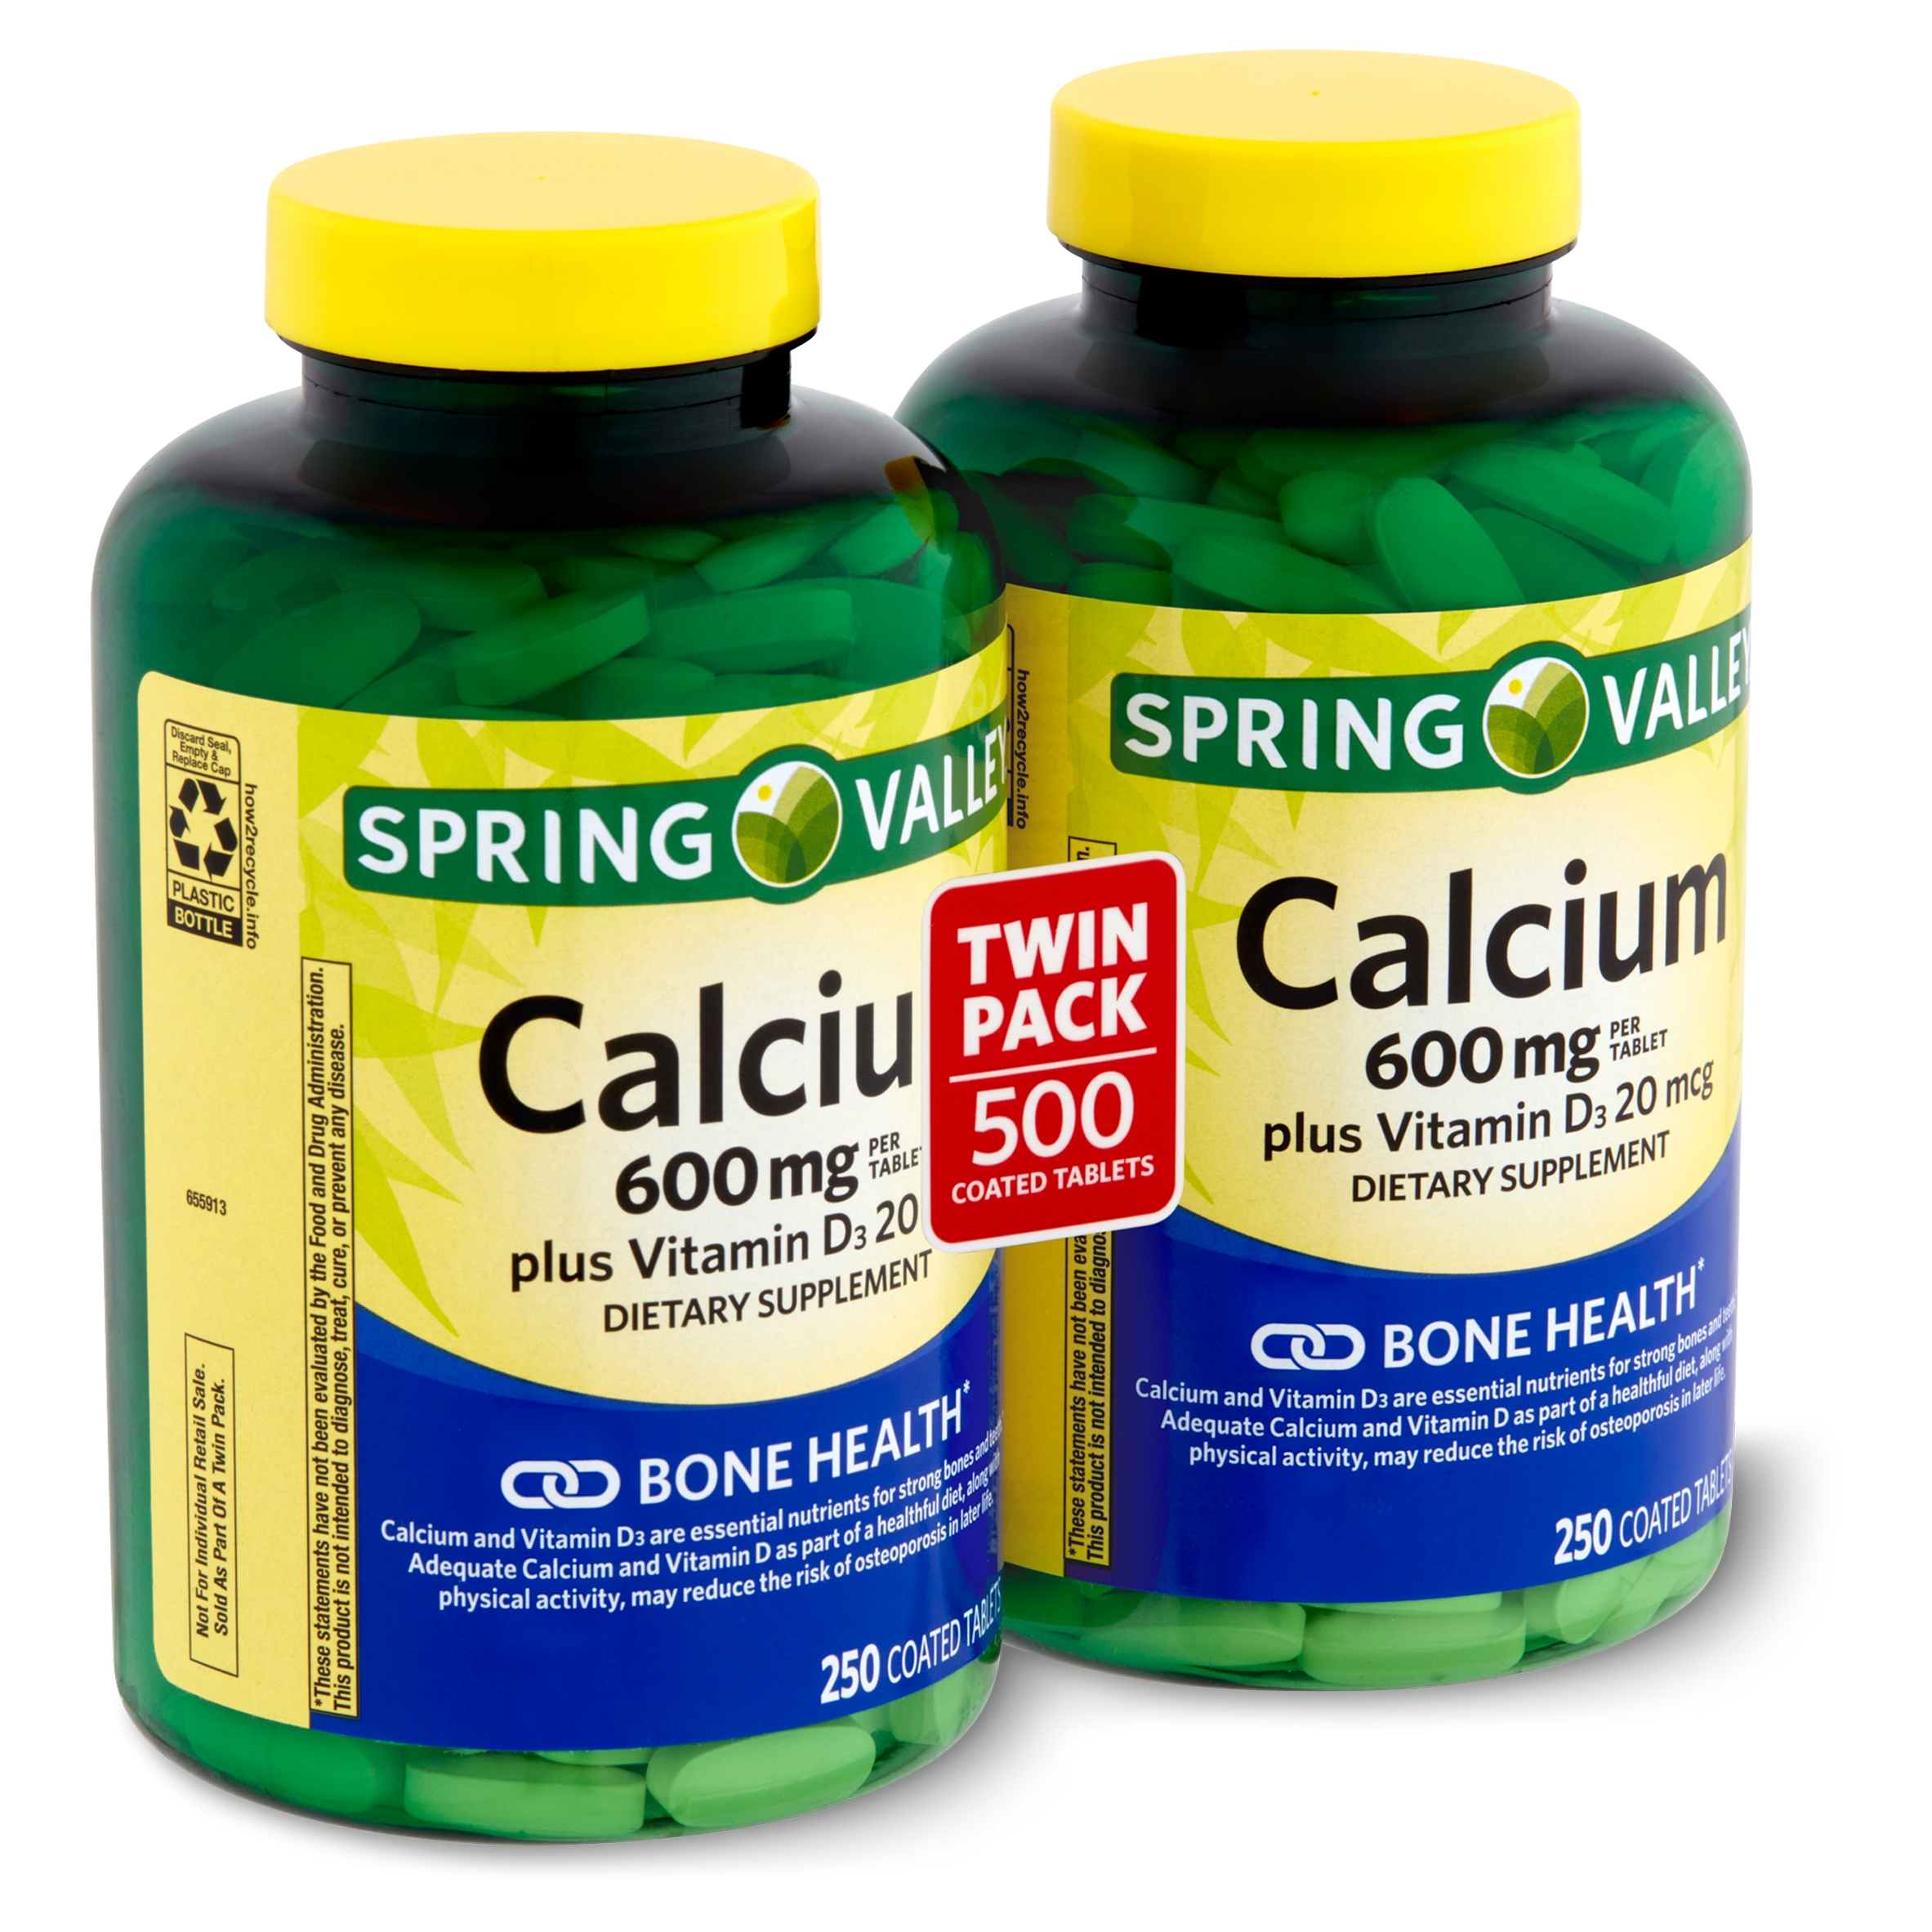 Spring Valley Calcium Plus Vitamin D3 Dietary Supplement, 600 mg, 250 Count, 2 Pack - image 1 of 9